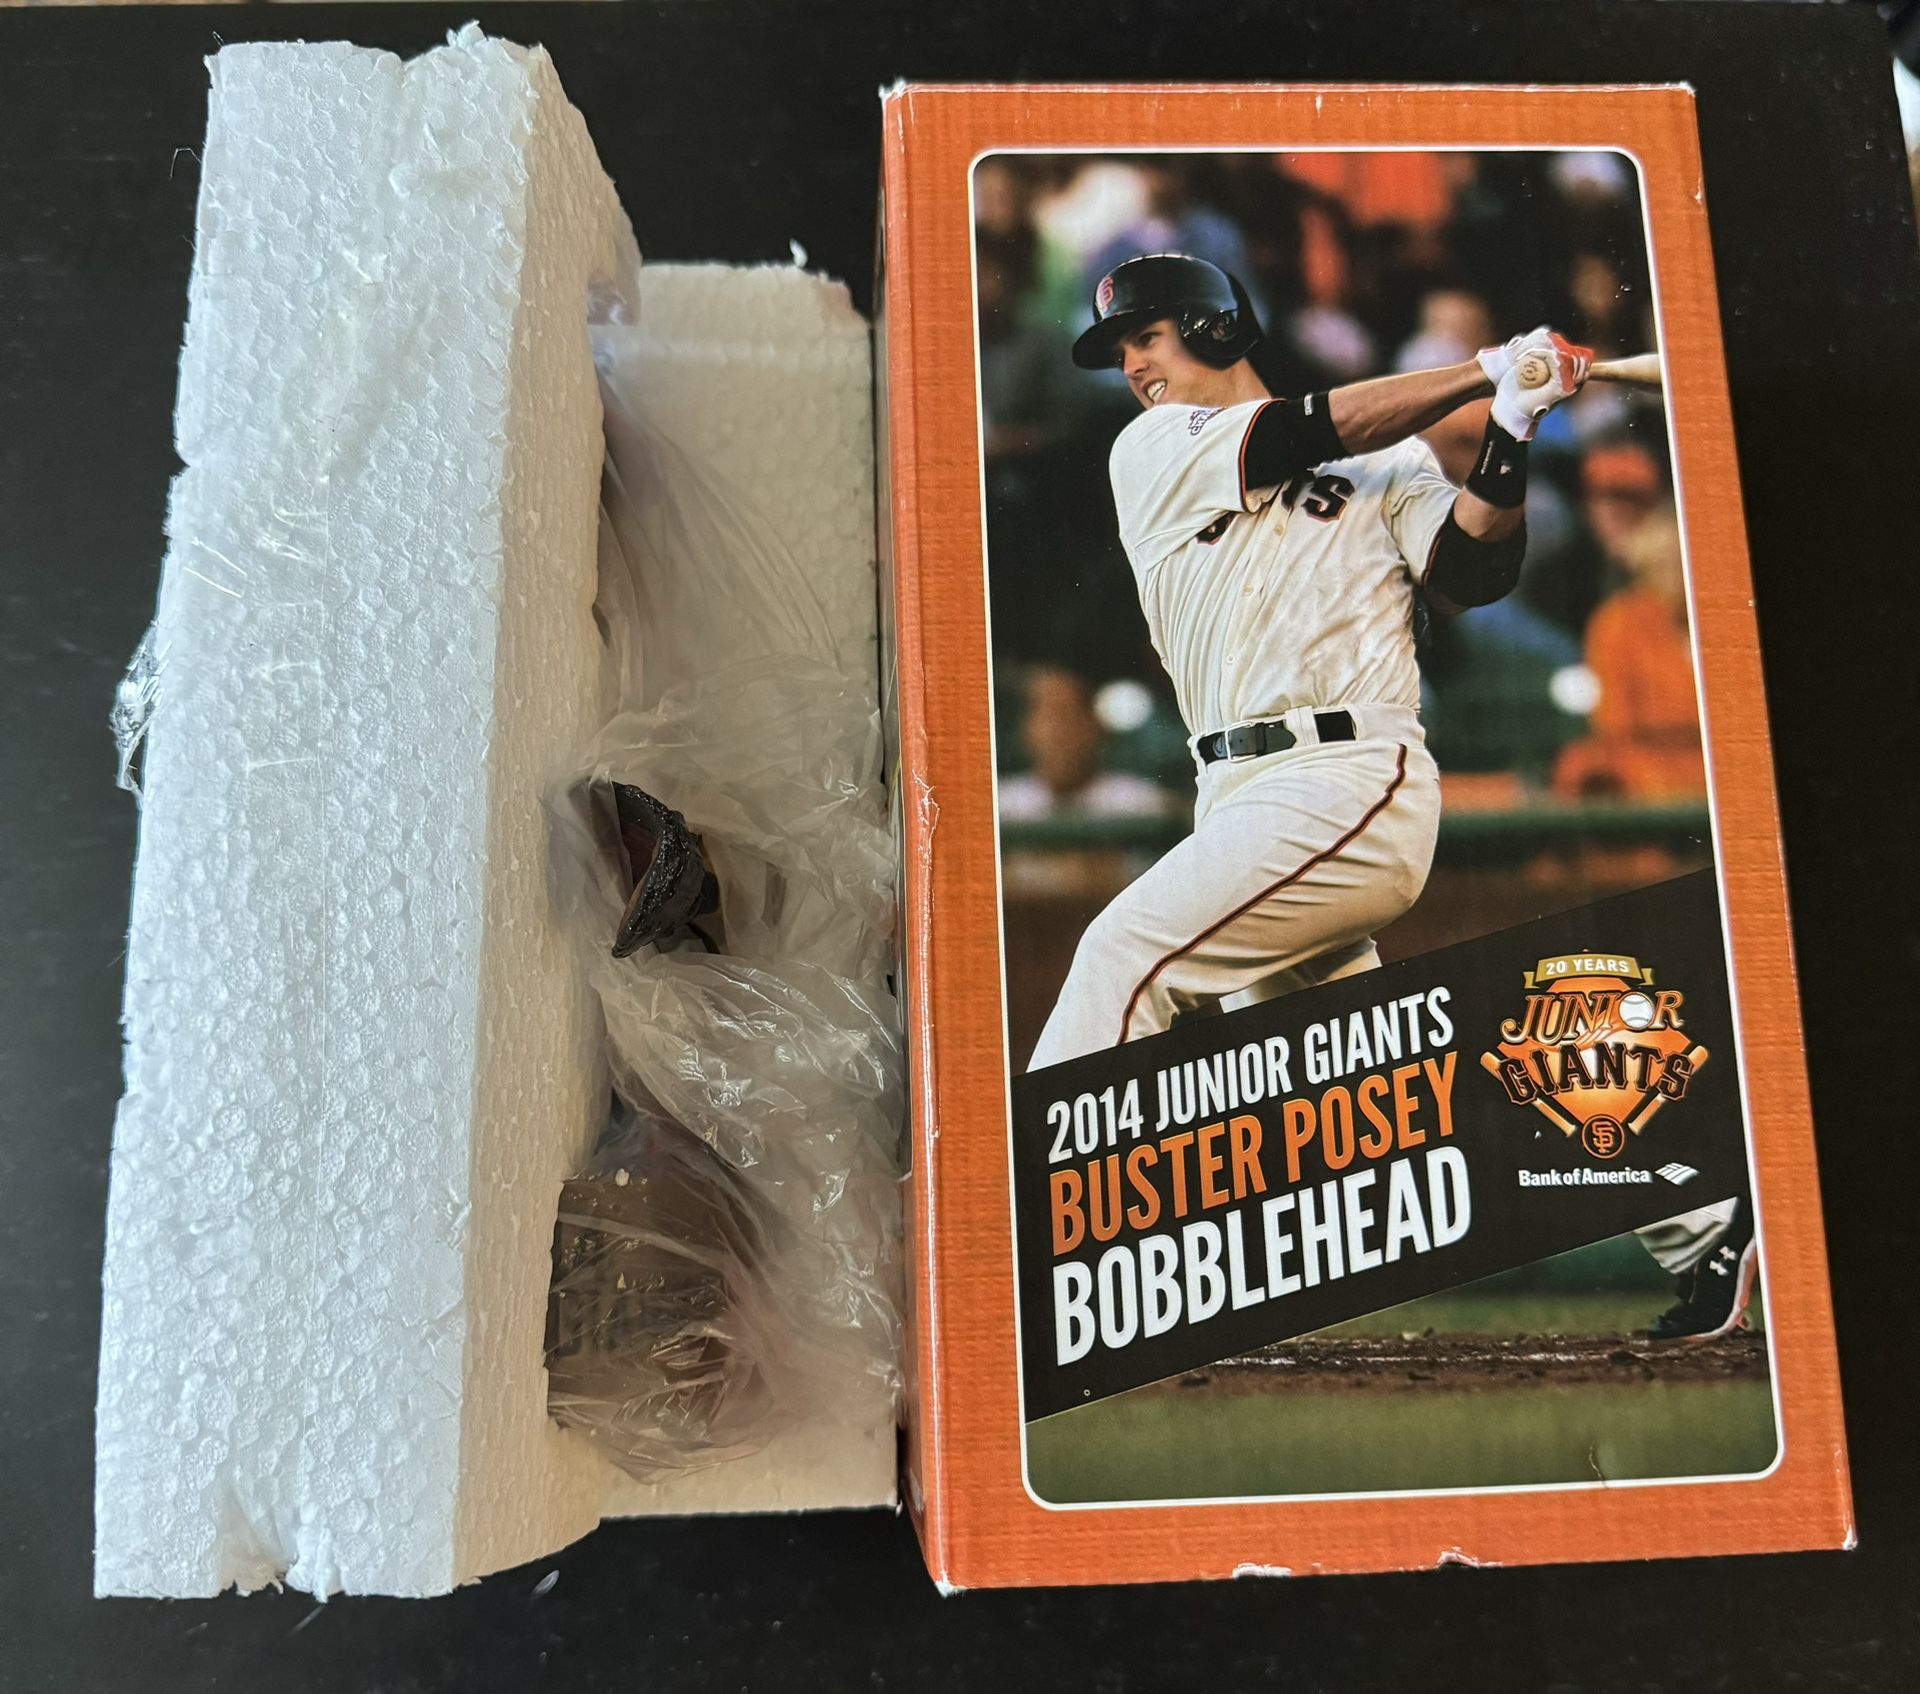 San Francisco Giants 2014 #28 Buster Posey Junior Giants Bobblehead. Brand New In Box. Only $25.00